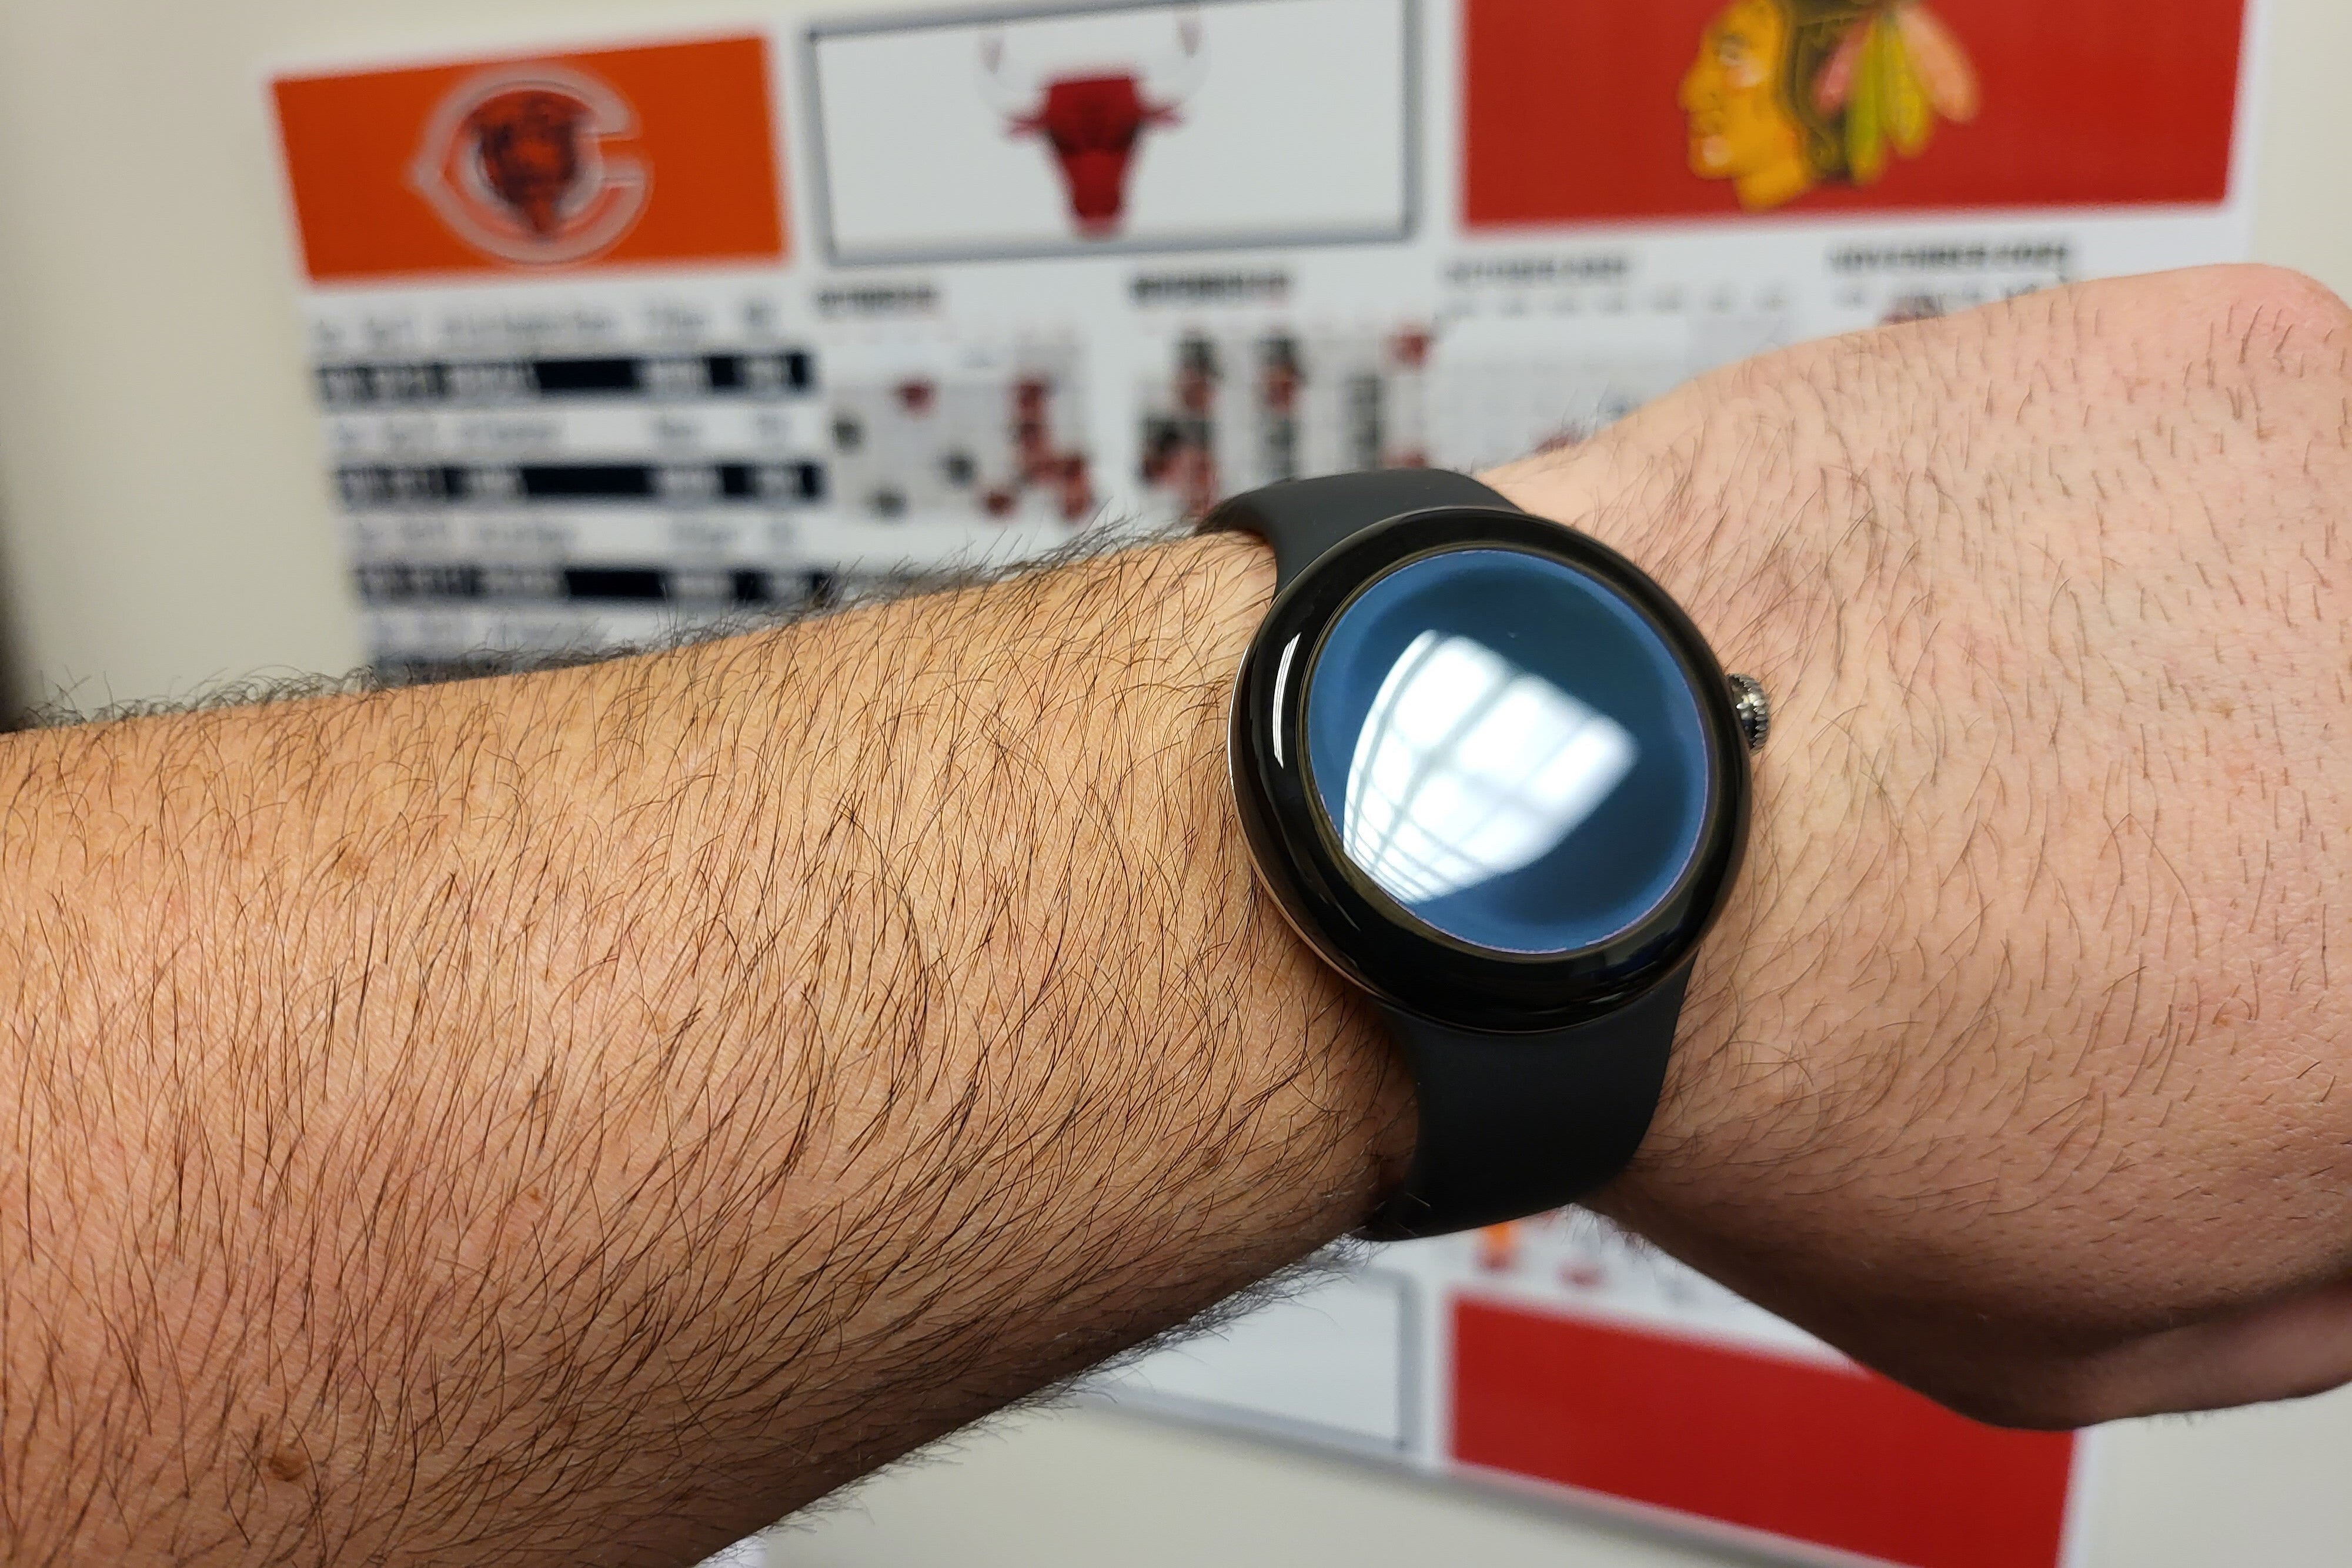 The Pixel Watch prototype has run out of charge - Redditor finally tries on Pixel Watch, says it&#039;s the &#039;most comfortable watch&#039;